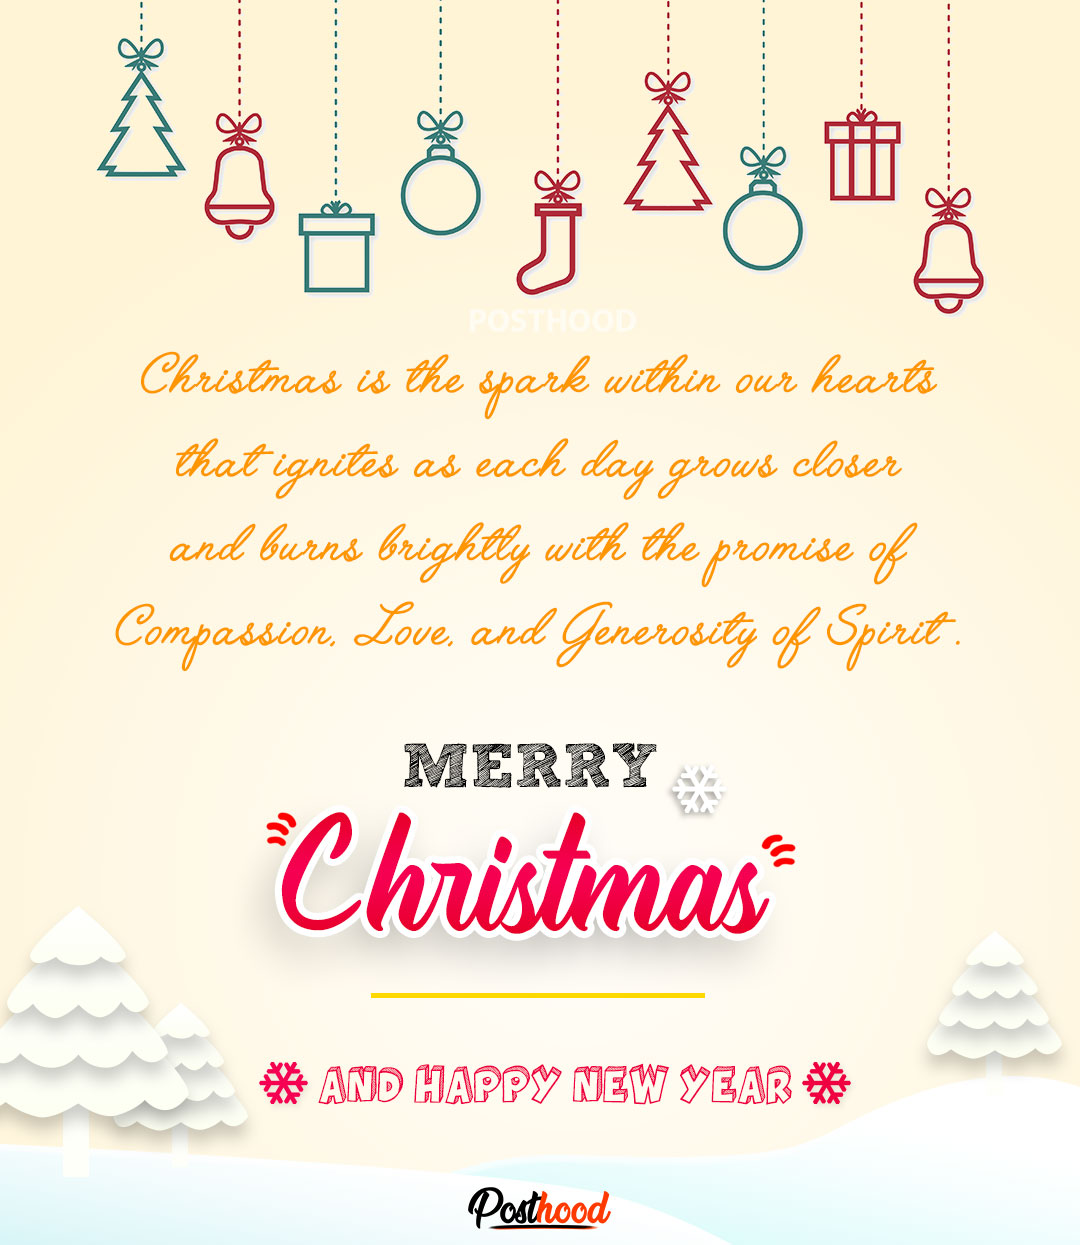 Wish your family and friends a very joyful Merry Christmas and New Year!! Send your love and blessings with these heartwarming cute Christmas messages.